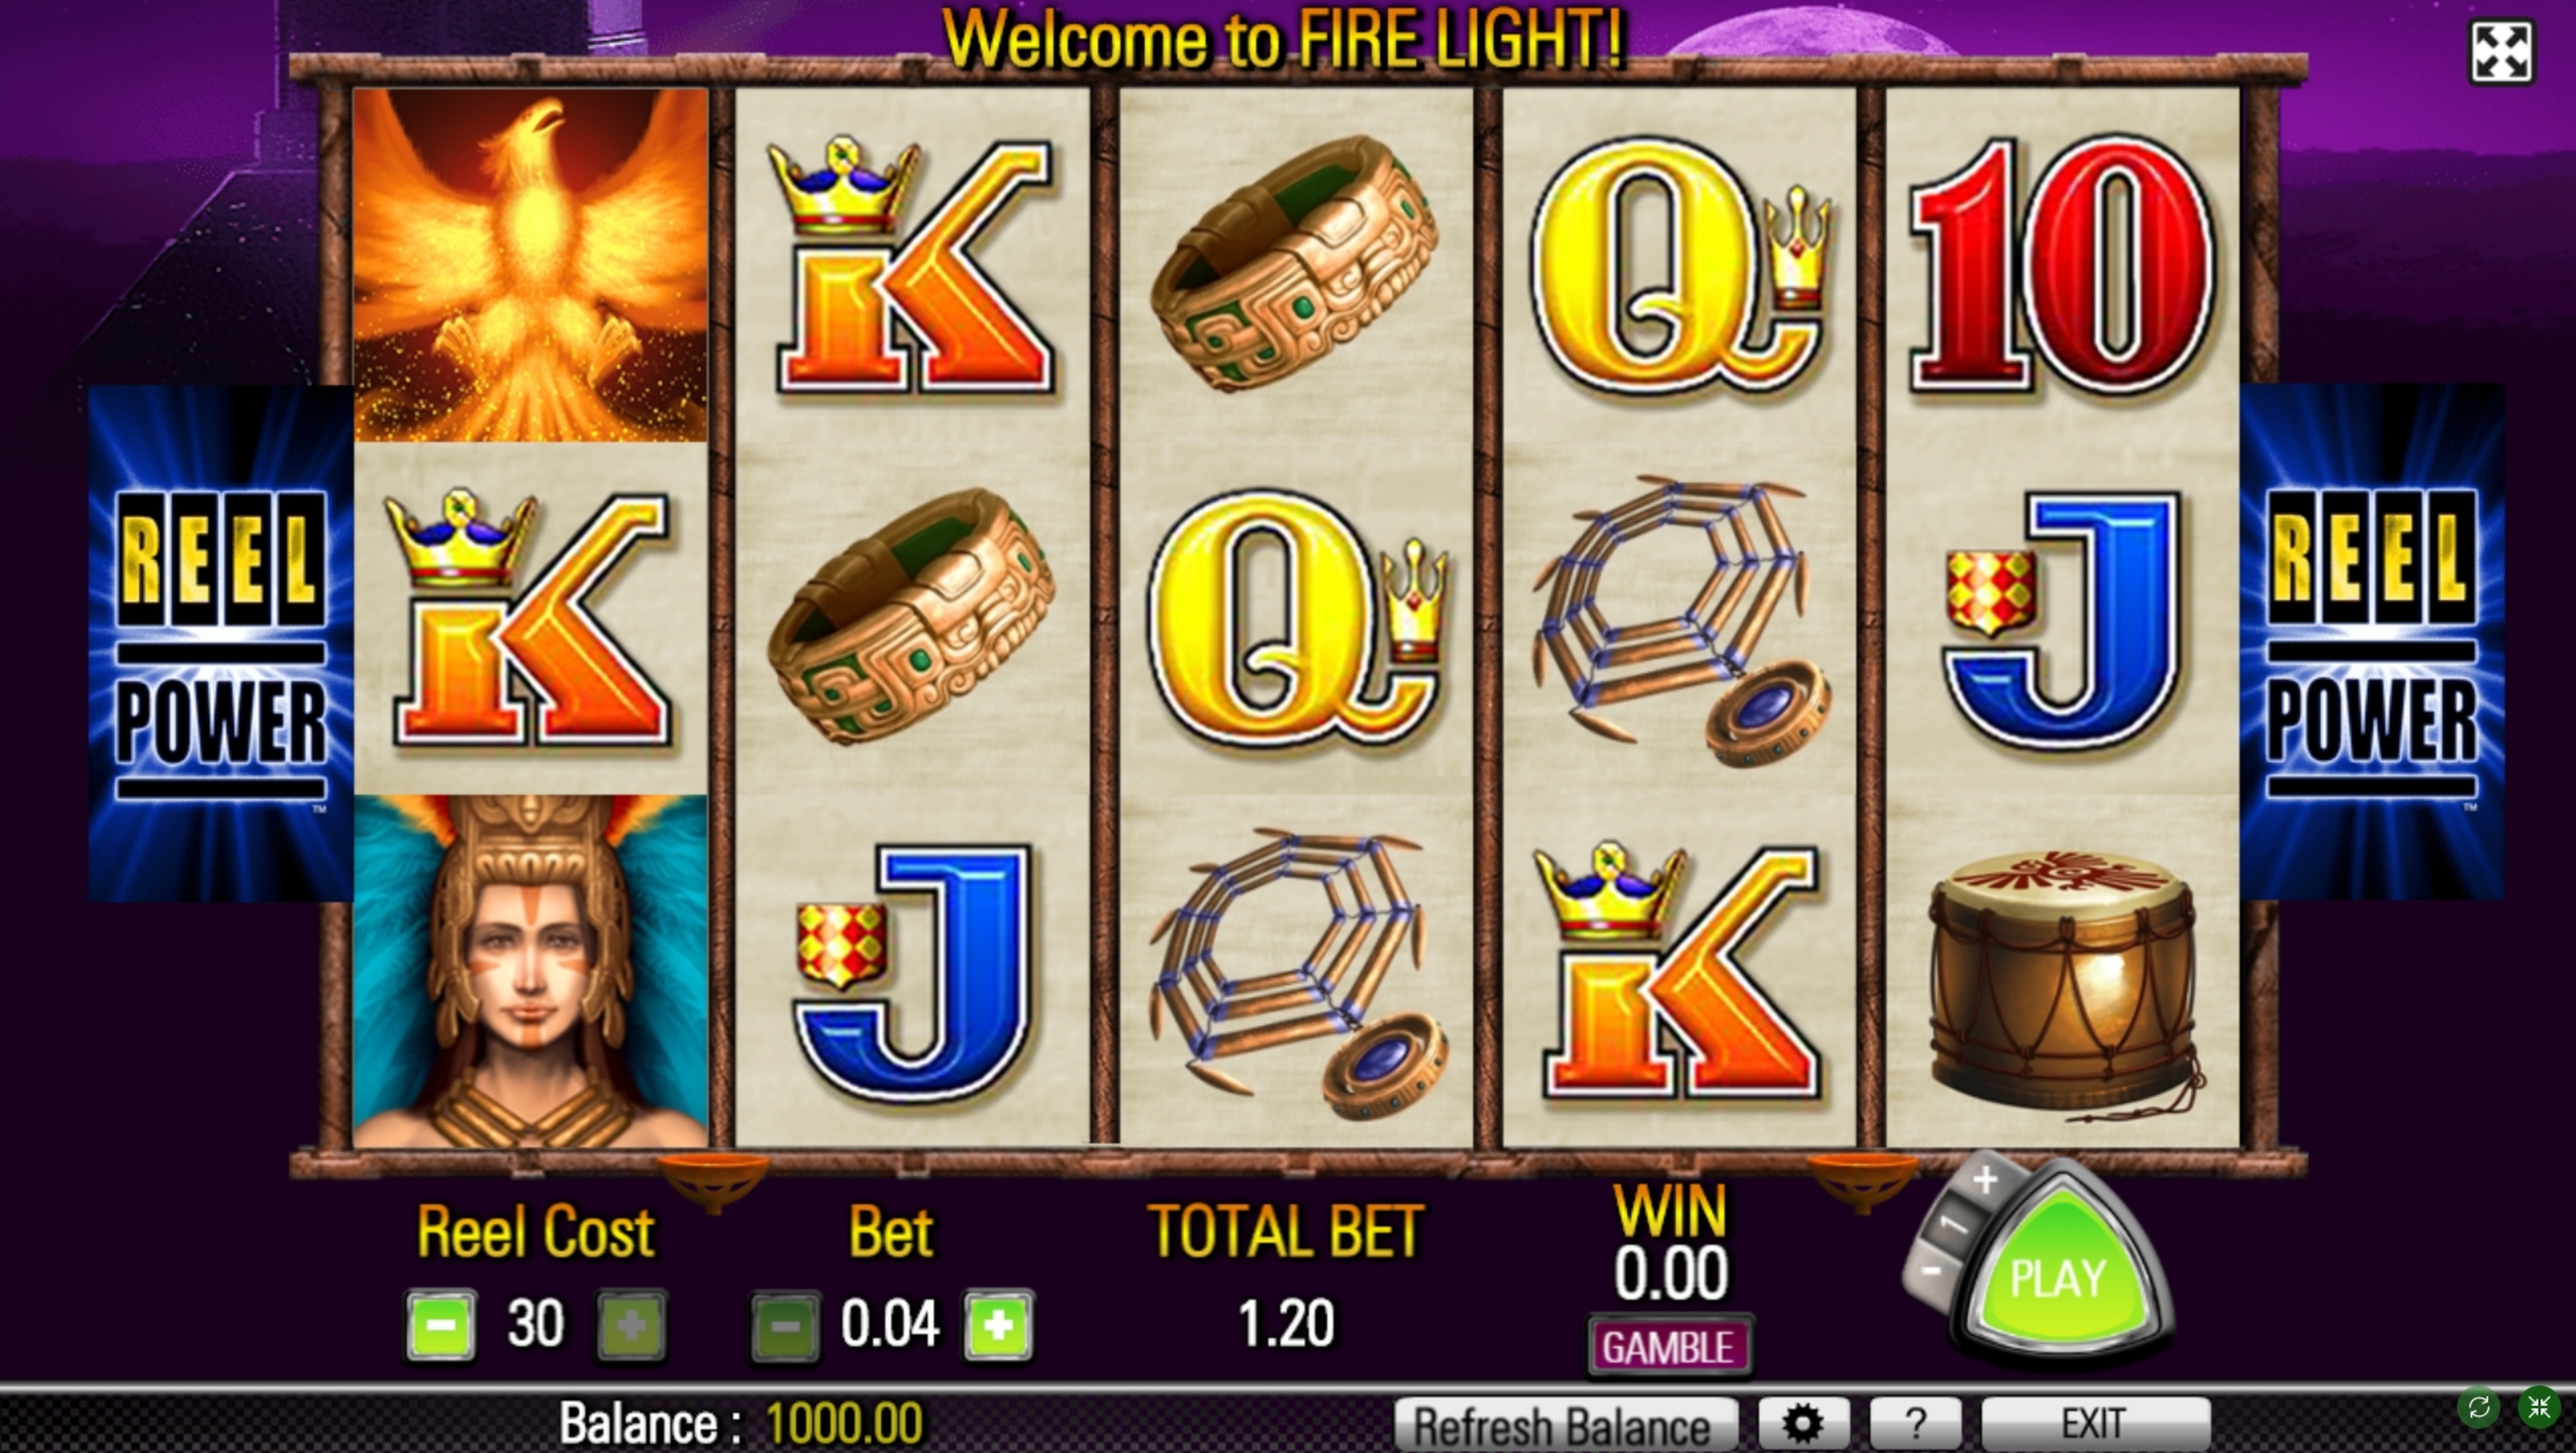 Reels in Firelight Slot Game by Aristocrat